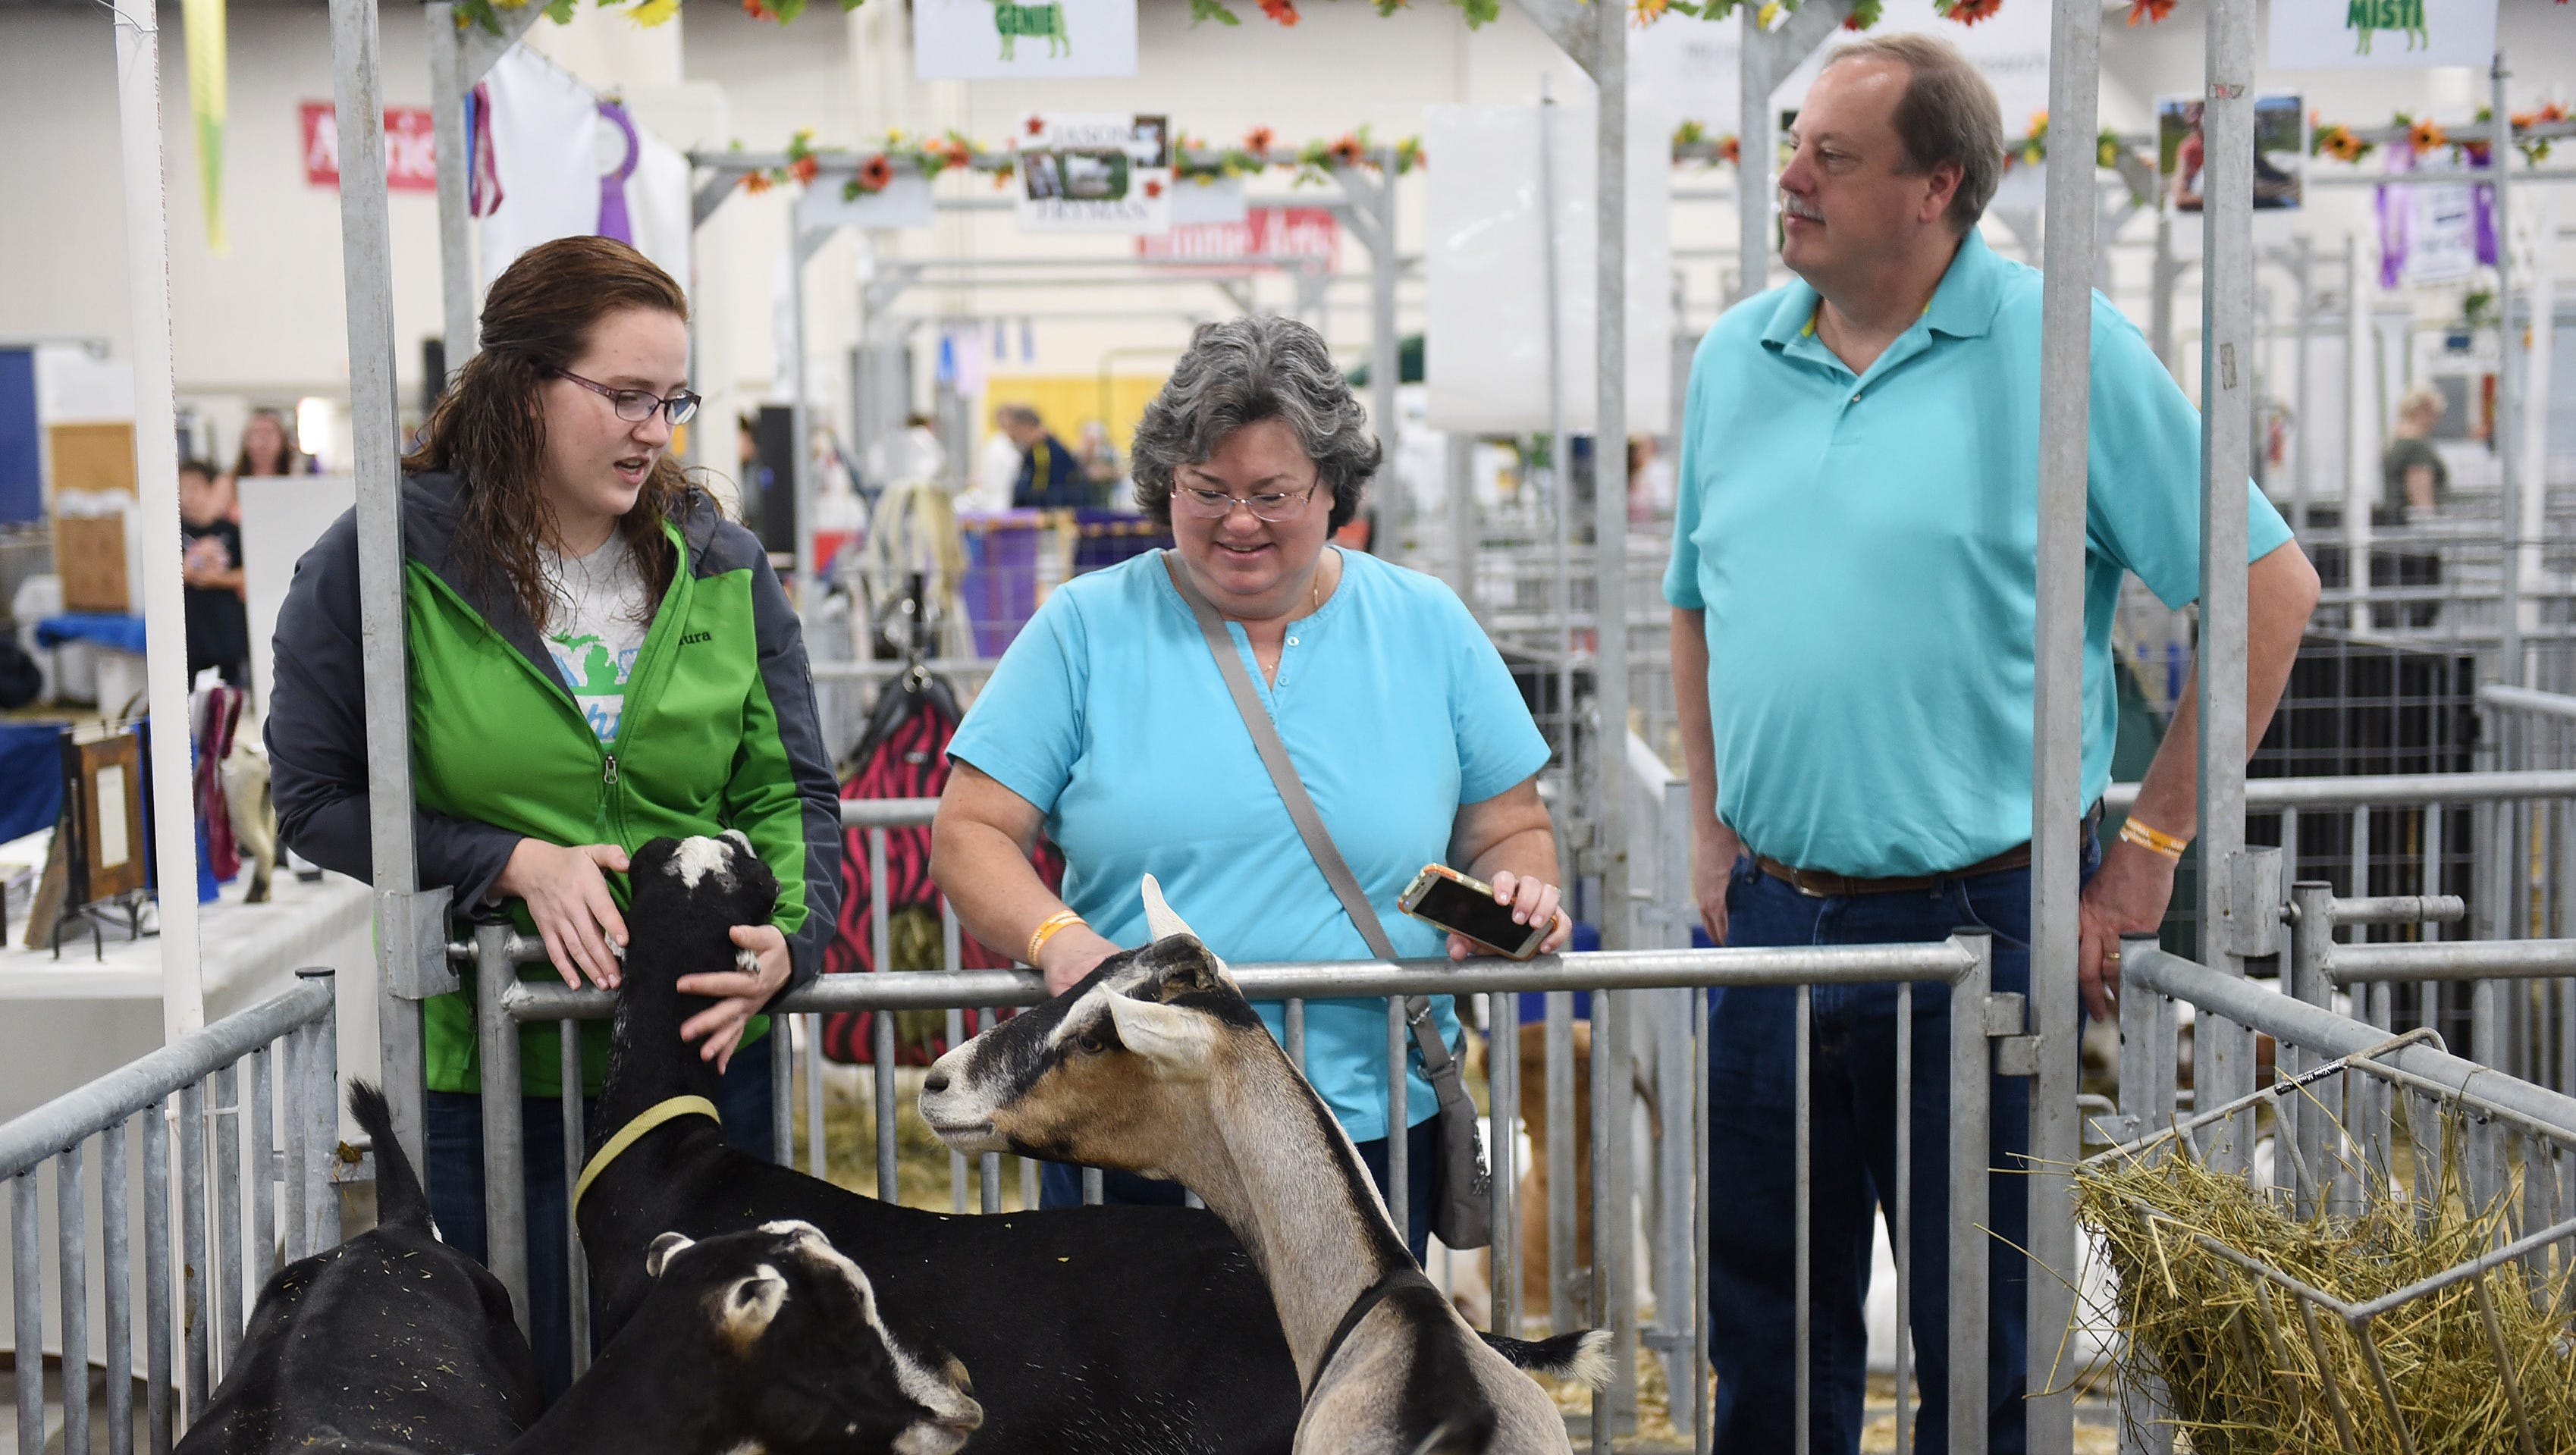 Laura Coon of Udderly Nutz Dairy Goats, left, talks with Laurrie Bissinger and Noel Bissinger of Lansing at Laura's display.